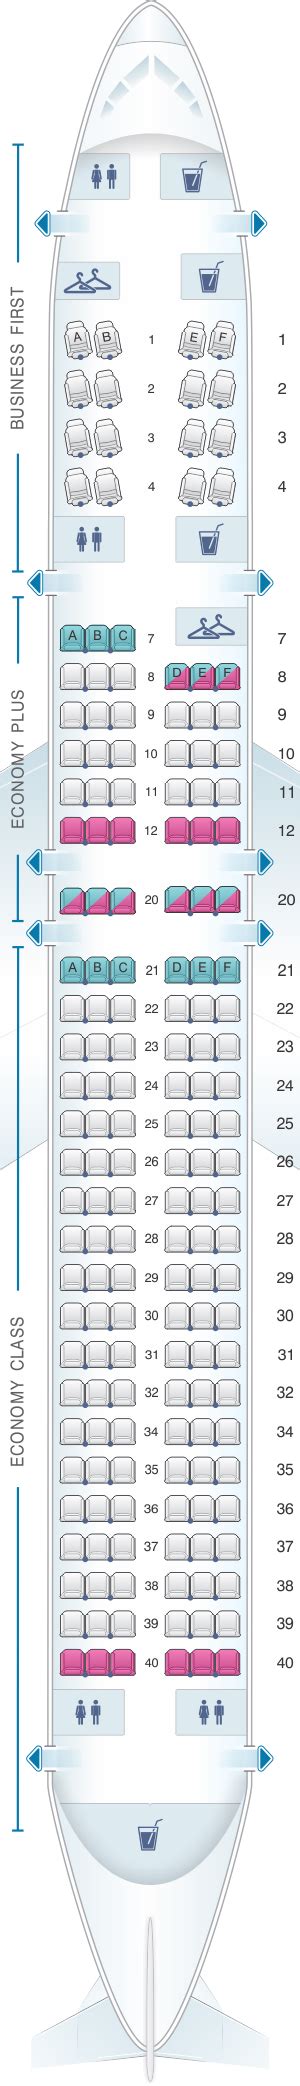 Lh437 seat map  Closed Suite Business (Rows 1-11) Standard Economy (Rows 16-48) View map